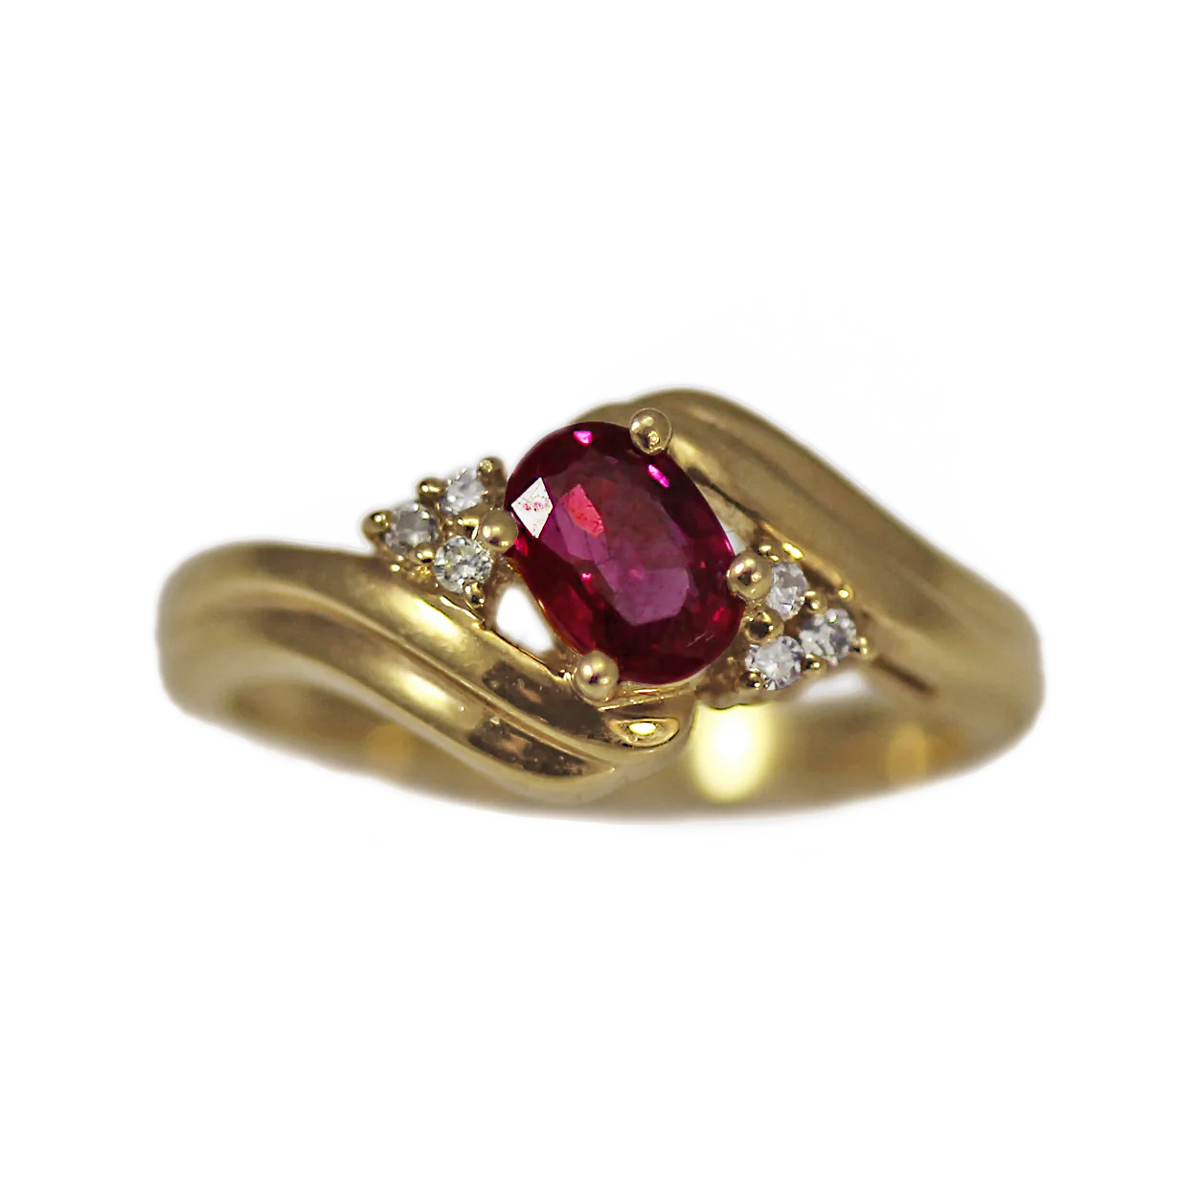 SPECIAL ORDER- 14K Yellow Gold Symmetrical Ruby and Diamond Ring